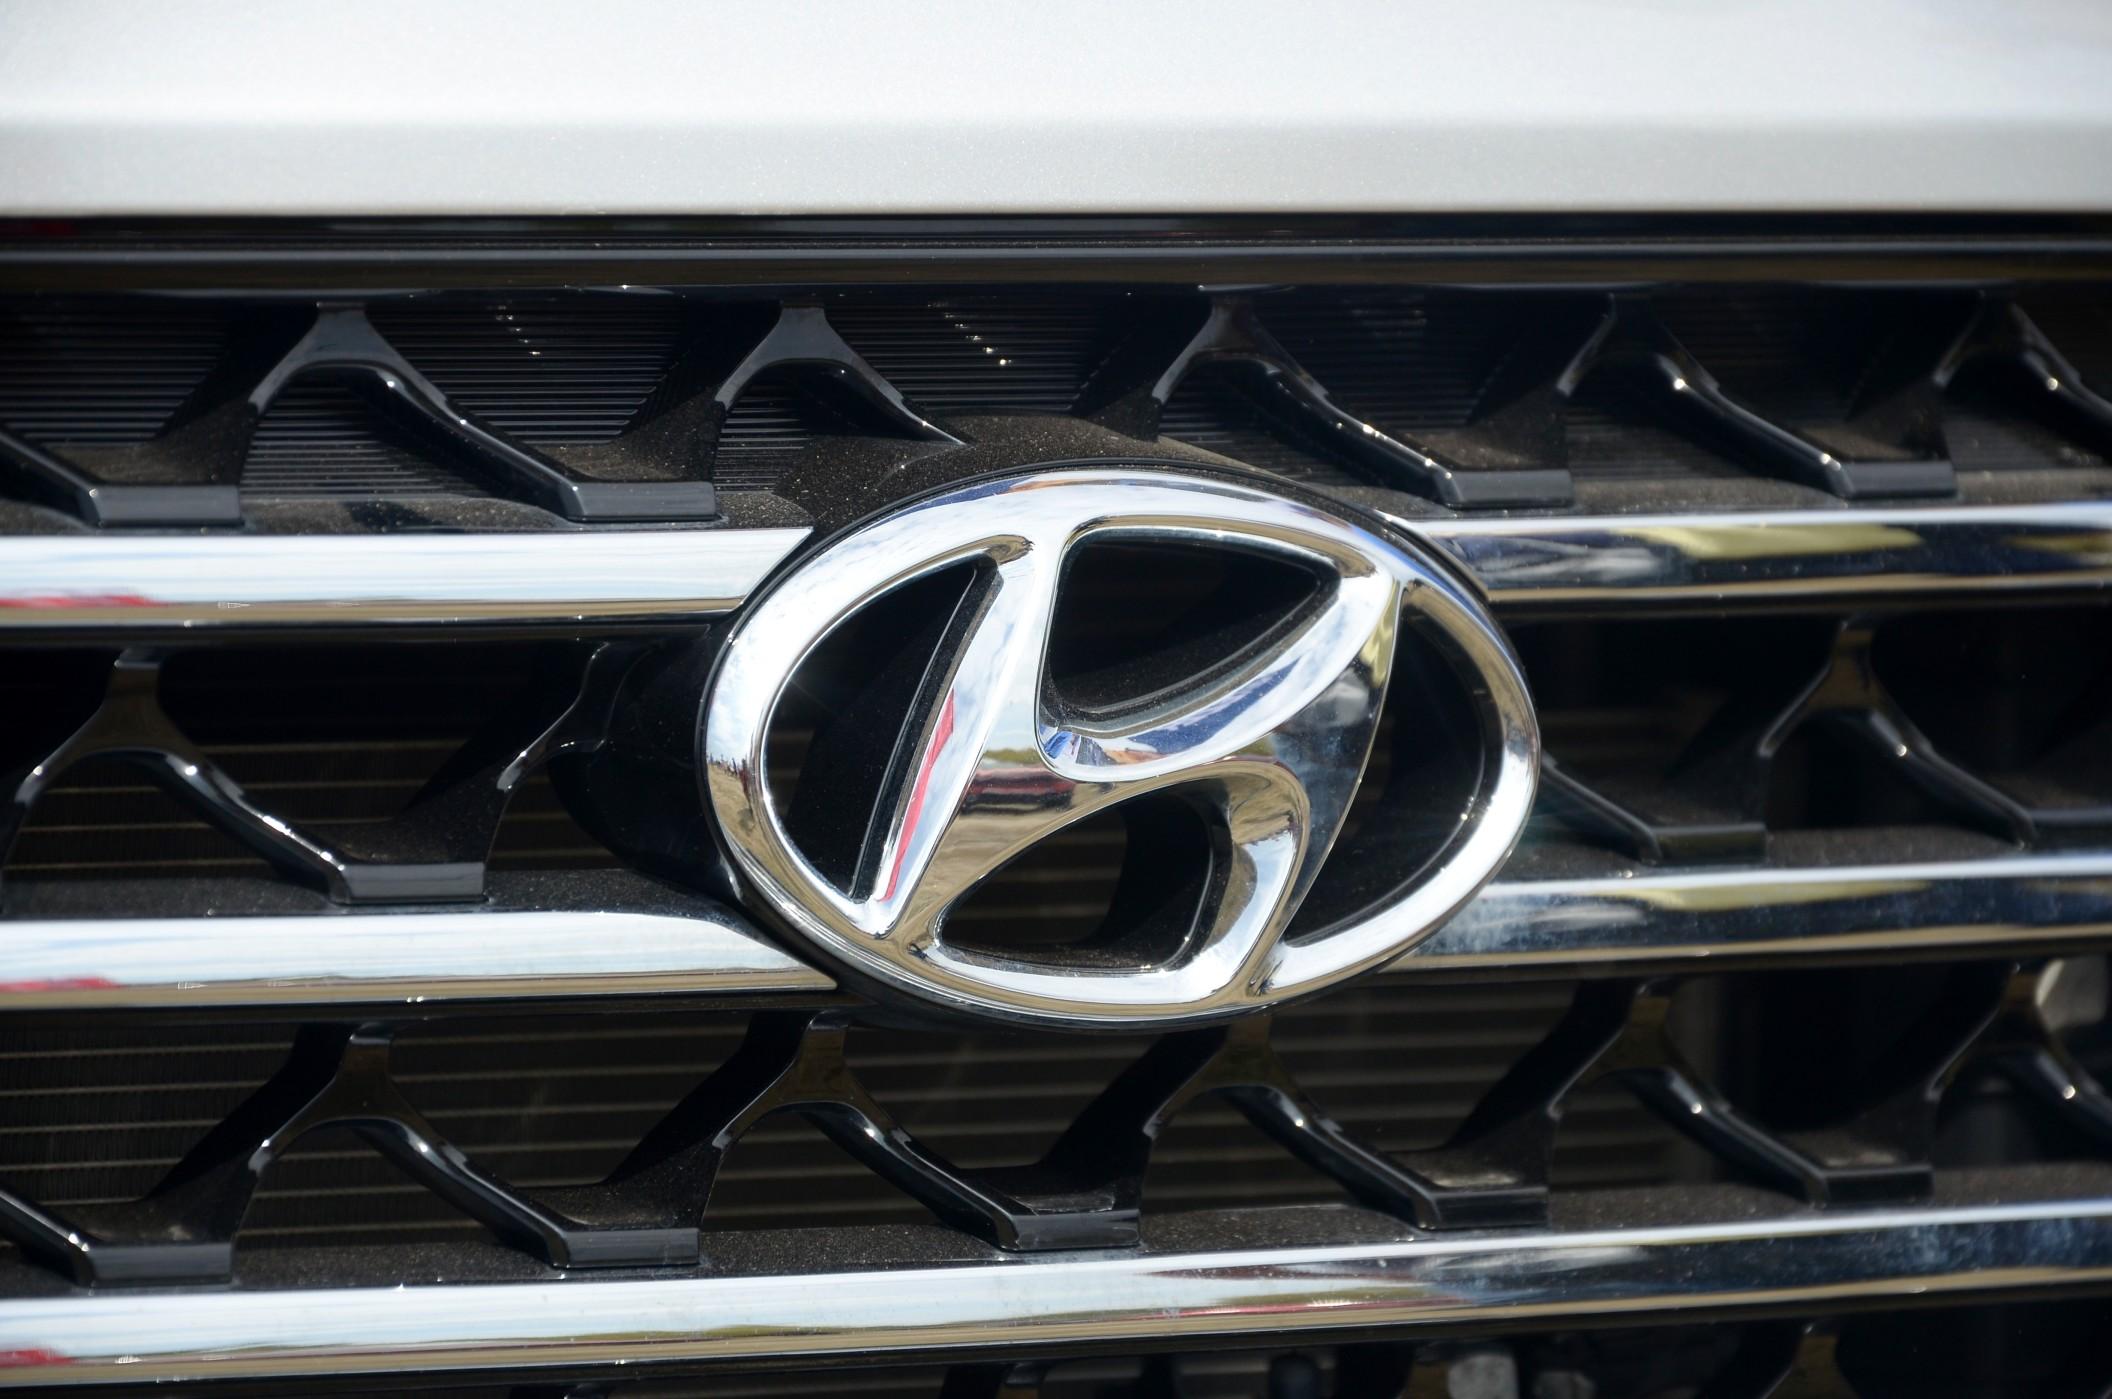 The 2021 Hyundai Venue is the cheapest SUV you can buy, and it also has gotten positive reviews.